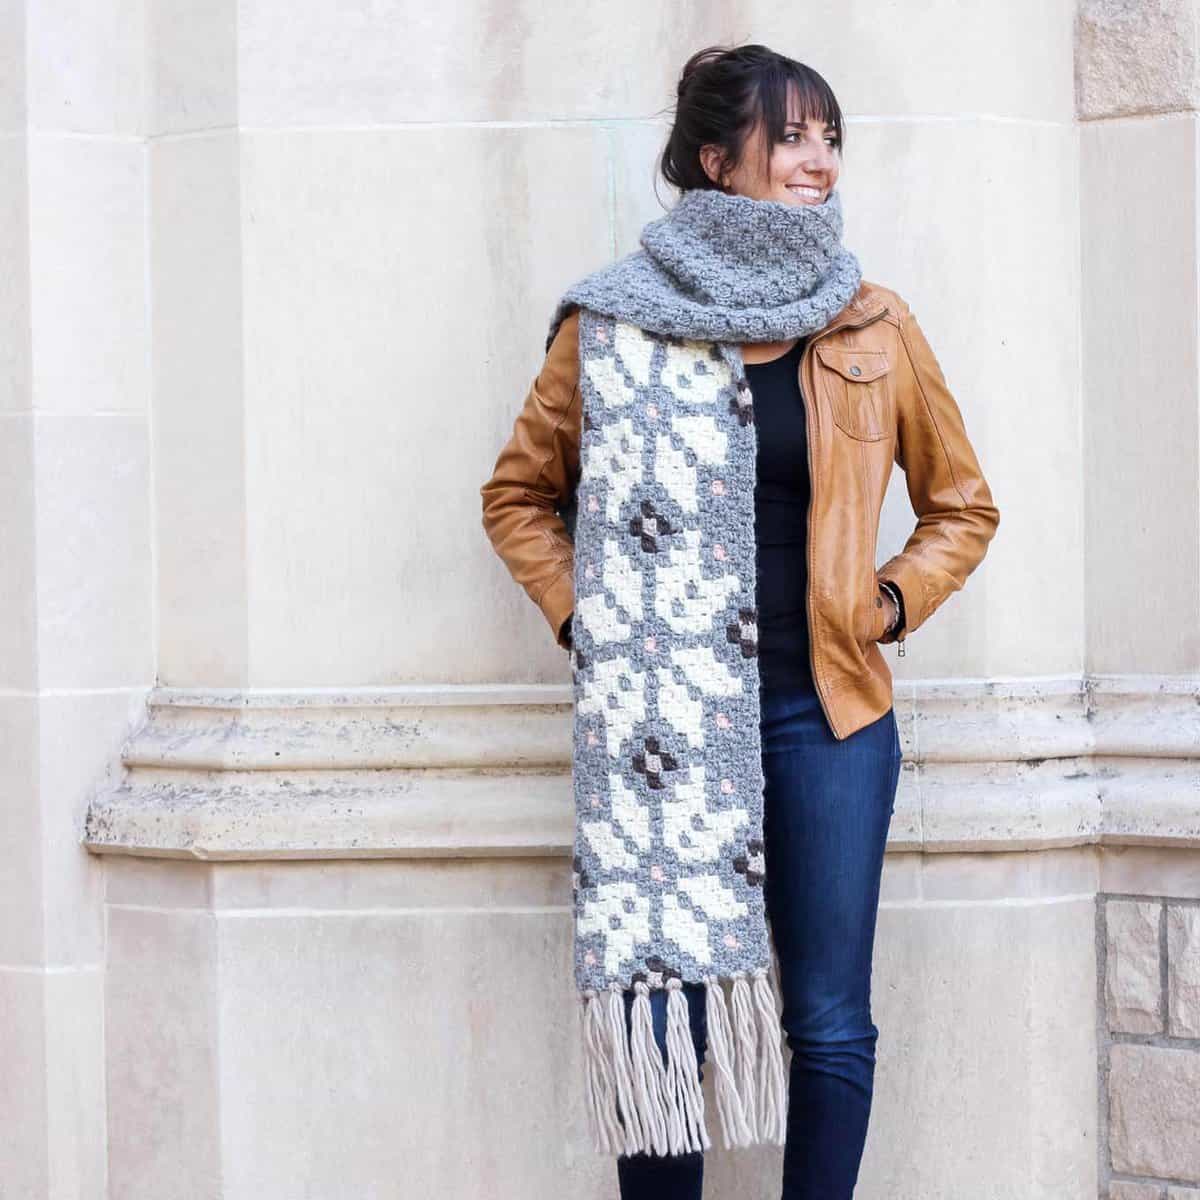 A woman looking sideways smiling with her hands on a brown leather jacket and a gray Nordic crochet super scarf on her neck.